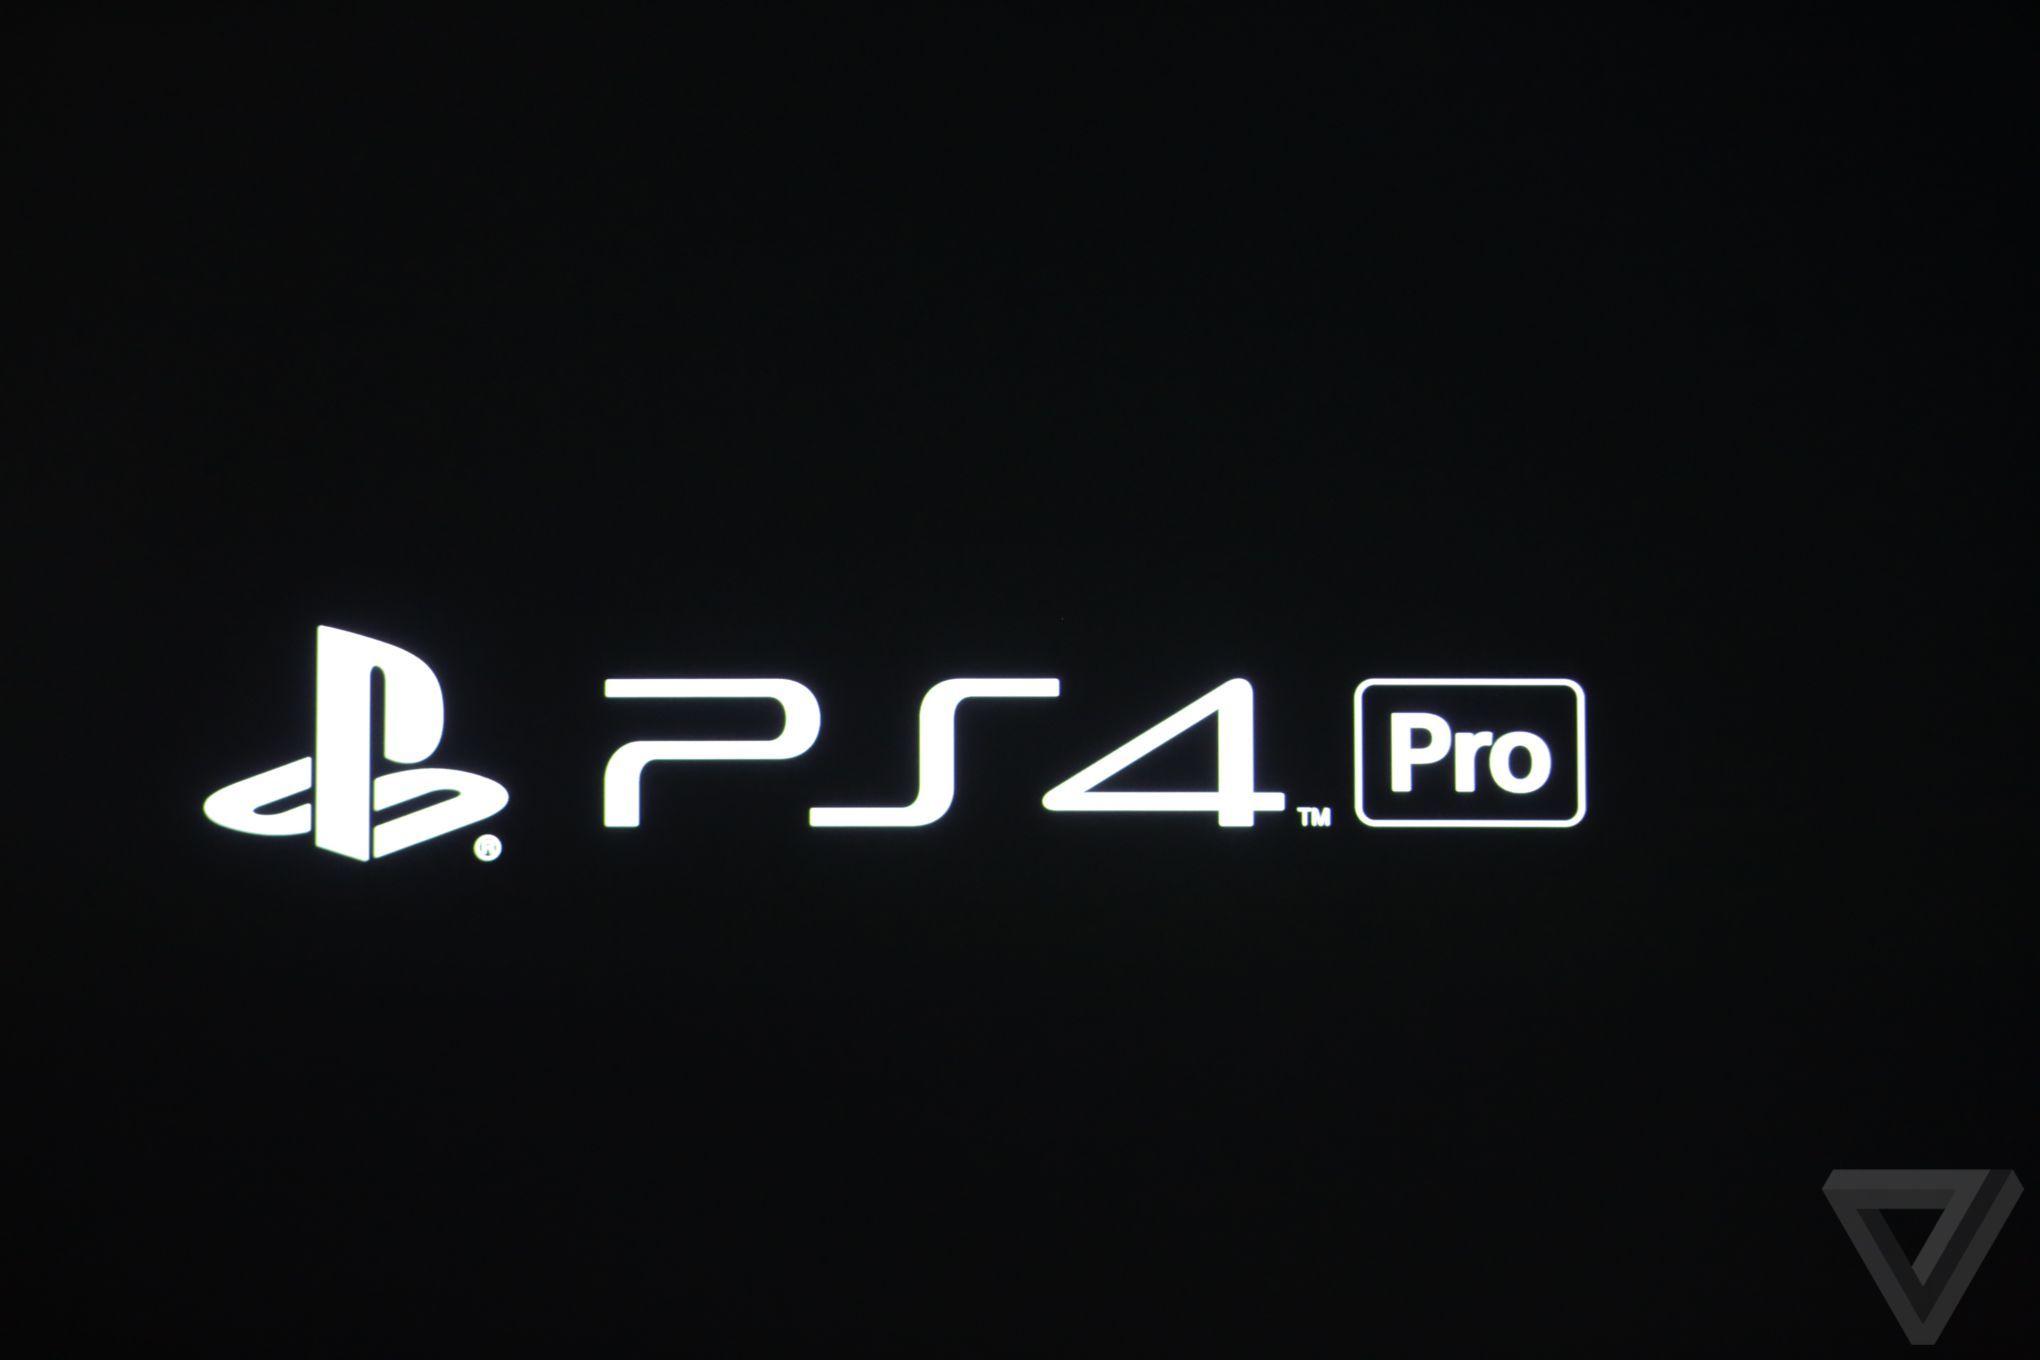 PS4 PlayStation 4 Logo - Sony announces PlayStation 4 Pro with 4K HDR gaming for $399 - The Verge